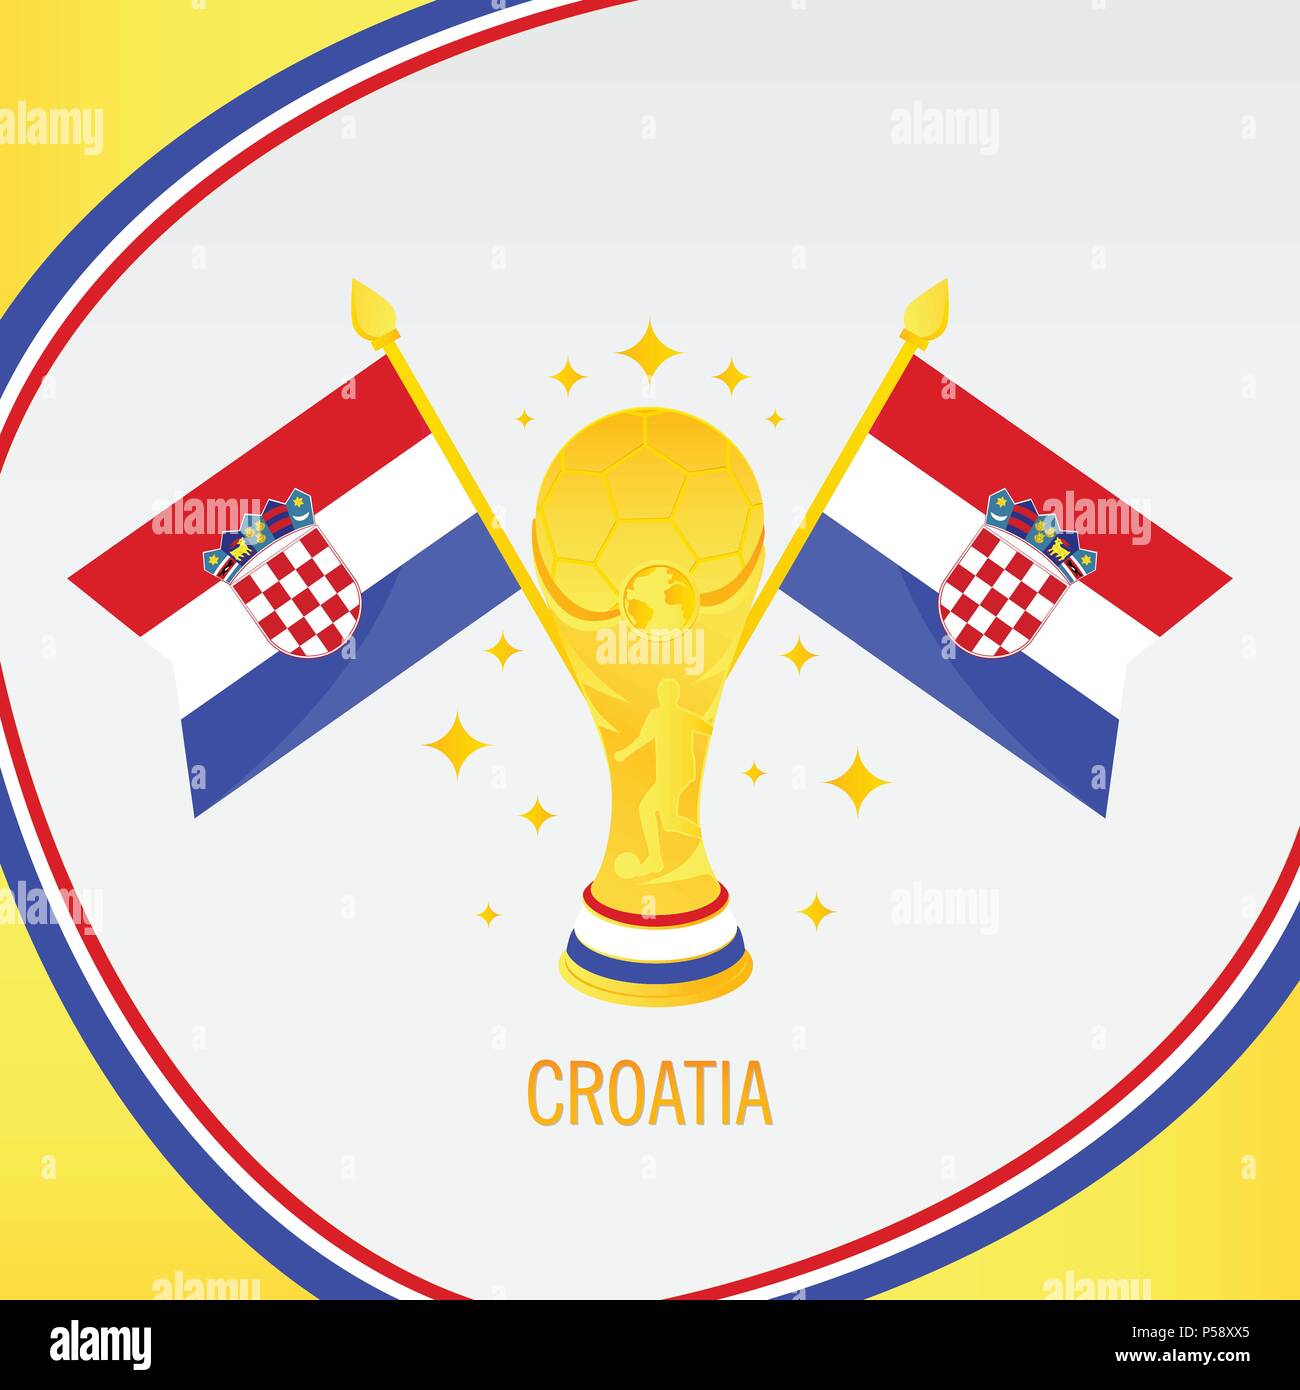 Croatia Football Champion 2018 - Flag and Golden Trophy / Cup Stock Vector